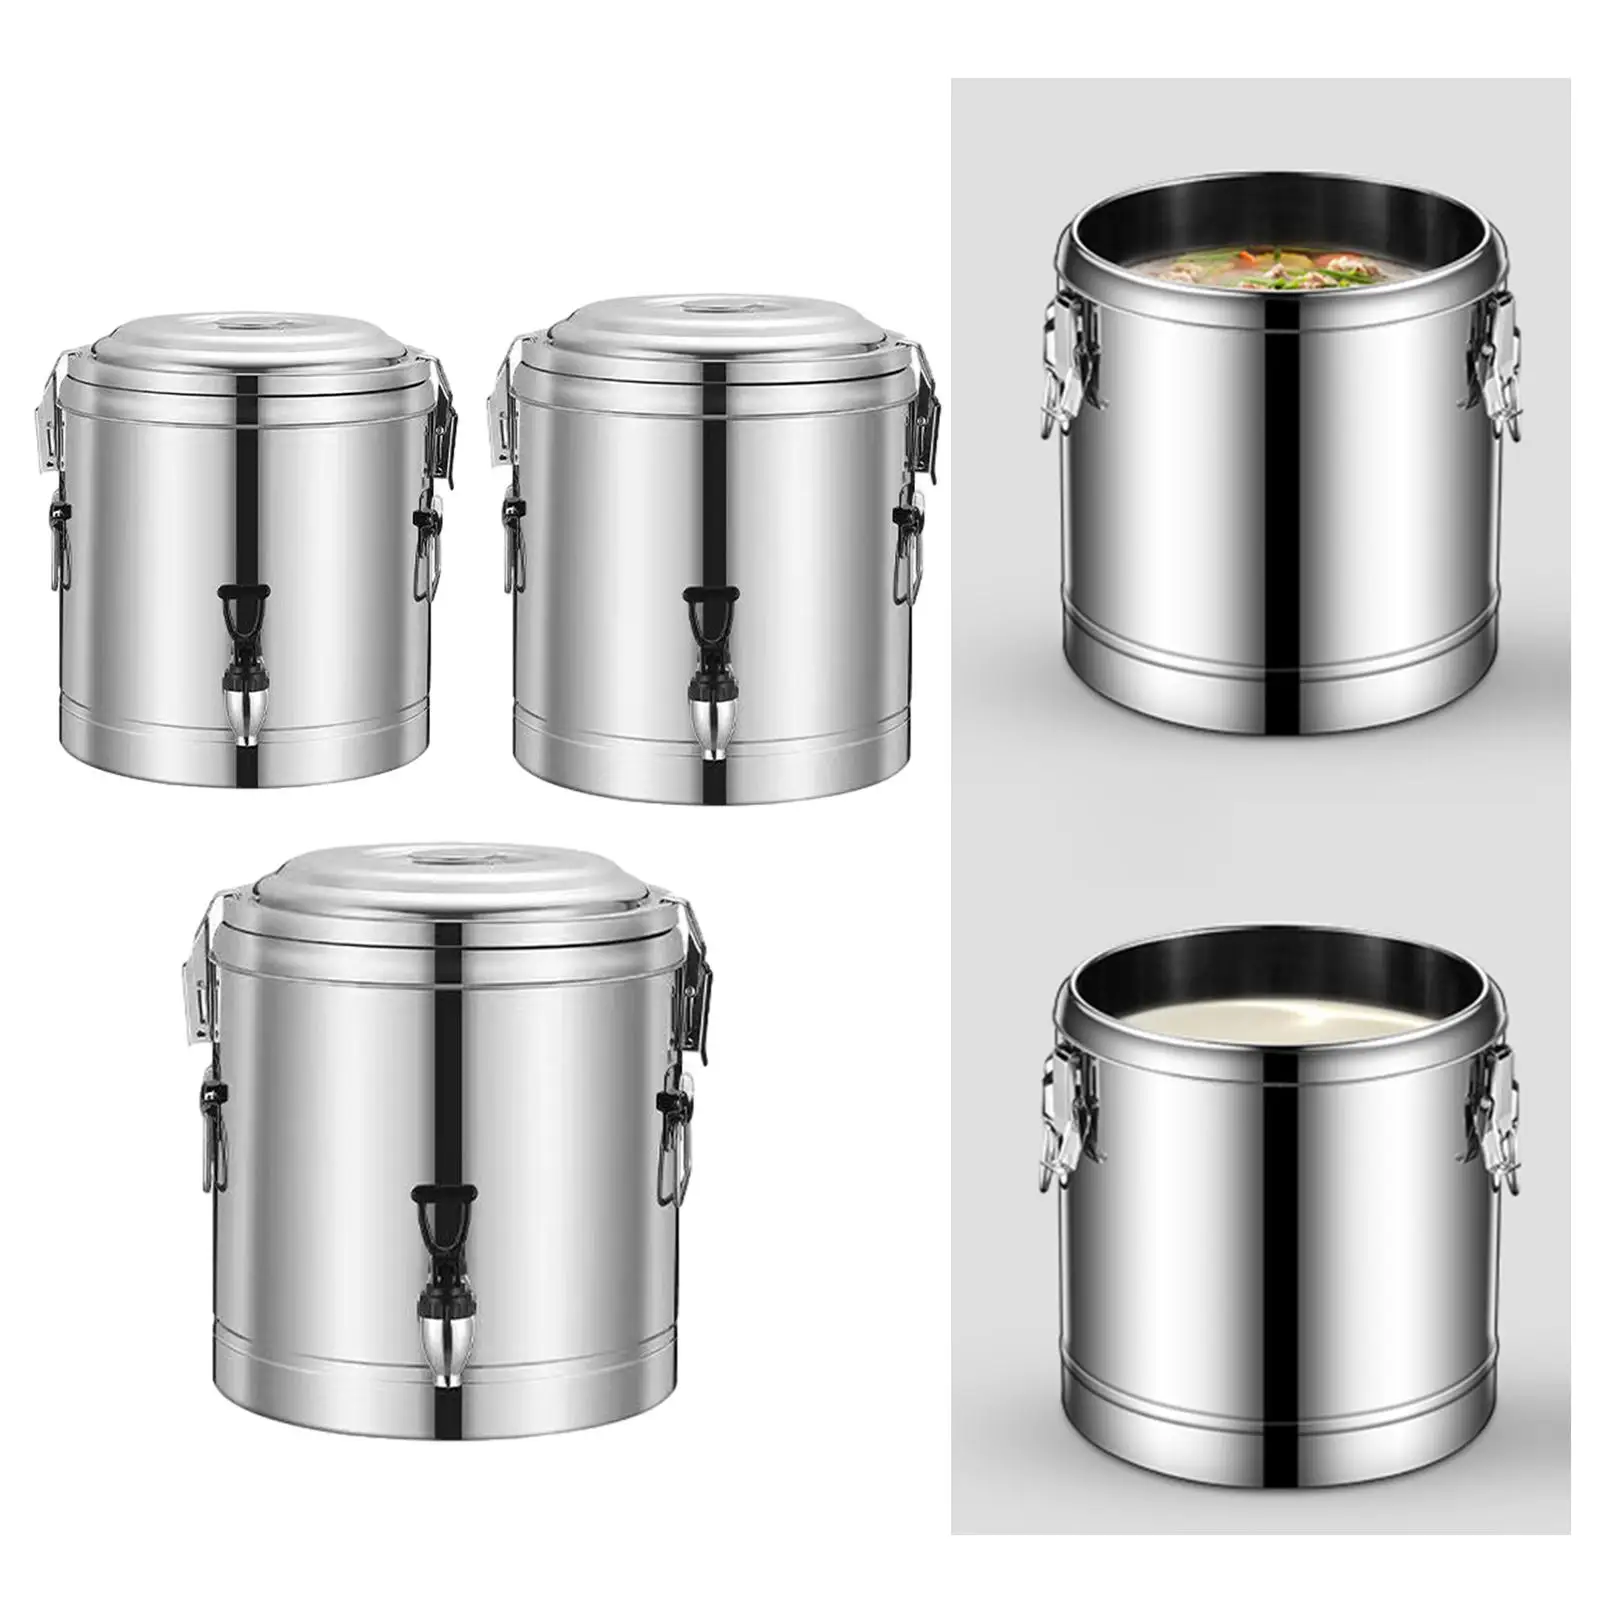 Hot and Cold Beverage Dispenser Stainless Steel Coffee Insulation Barrel for Party Cafe Family Reunion Restaurant Commercial Use